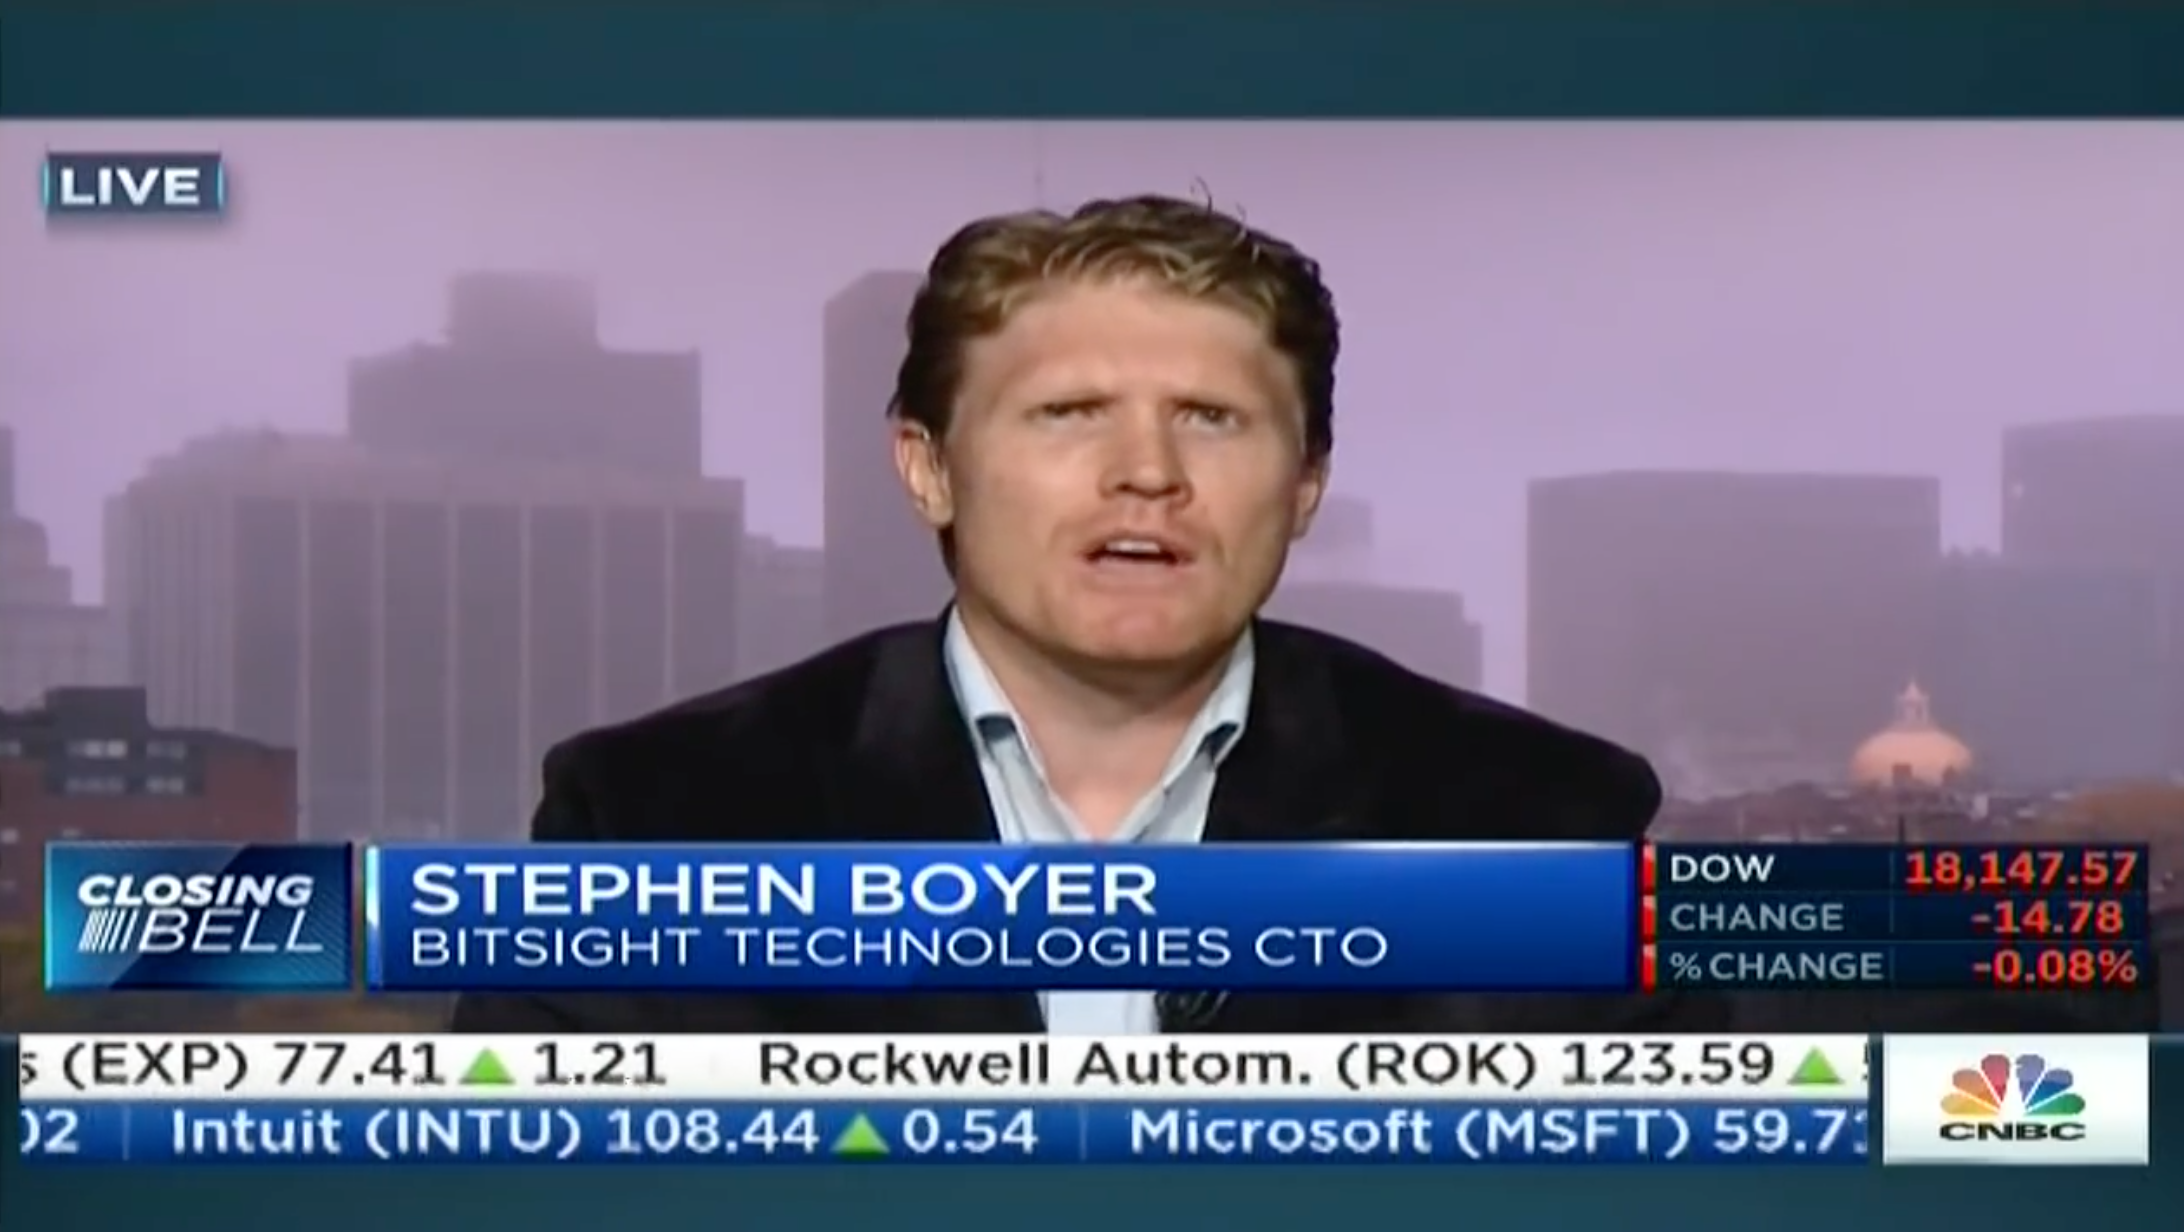 BitSight CTO Stephen Boyer Speaks on CNBC About A Massive DNS Outage